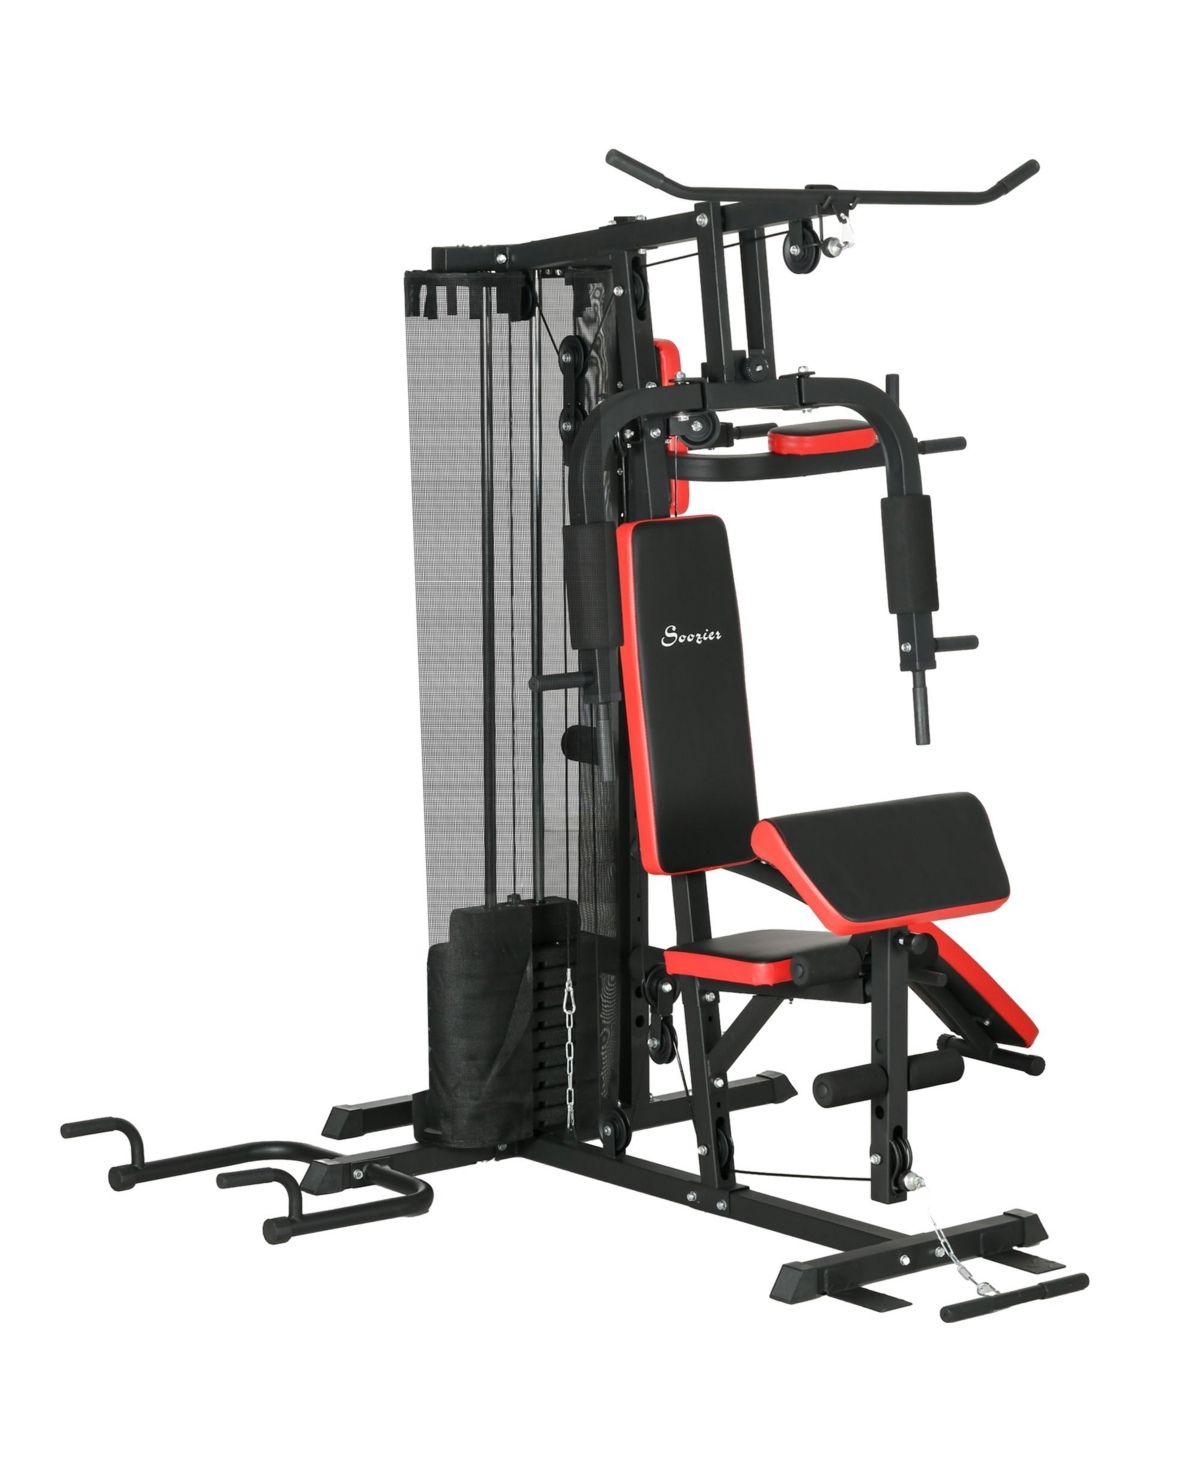 Multi Home Gym Equipment, Workout Station with 143lbs Weight Stack - Black